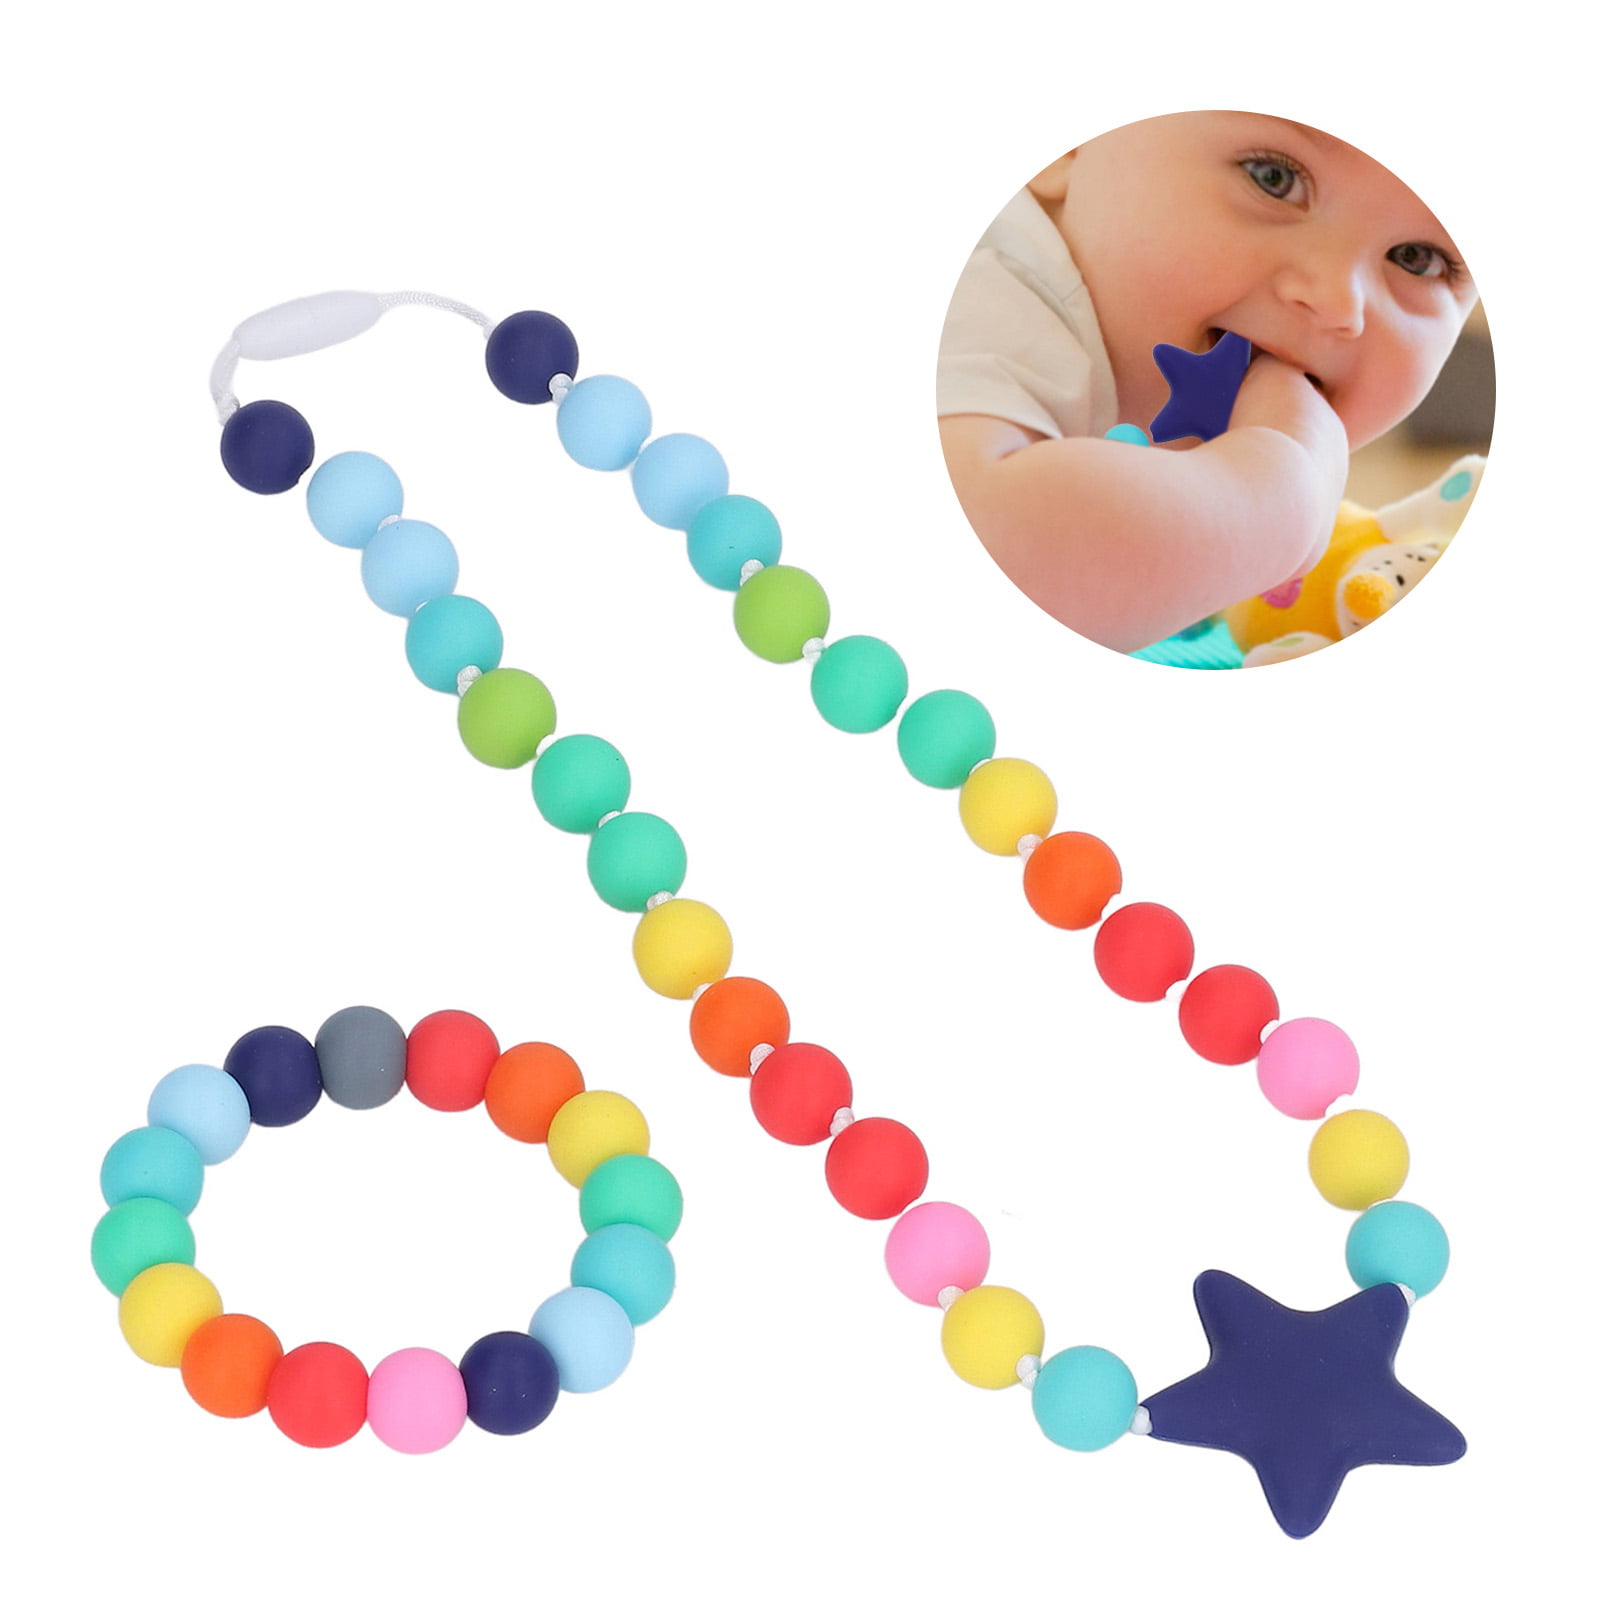 Amazon.com: Chew Necklaces for Sensory Kids, 6 PCS Sensory Chew Necklaces  for Boys Girls with ADHD, SPD, Autism, Chewing Needs, Silicone Chewy Necklaces  Chew Toys for Adults Used for Reliving Anxiety and